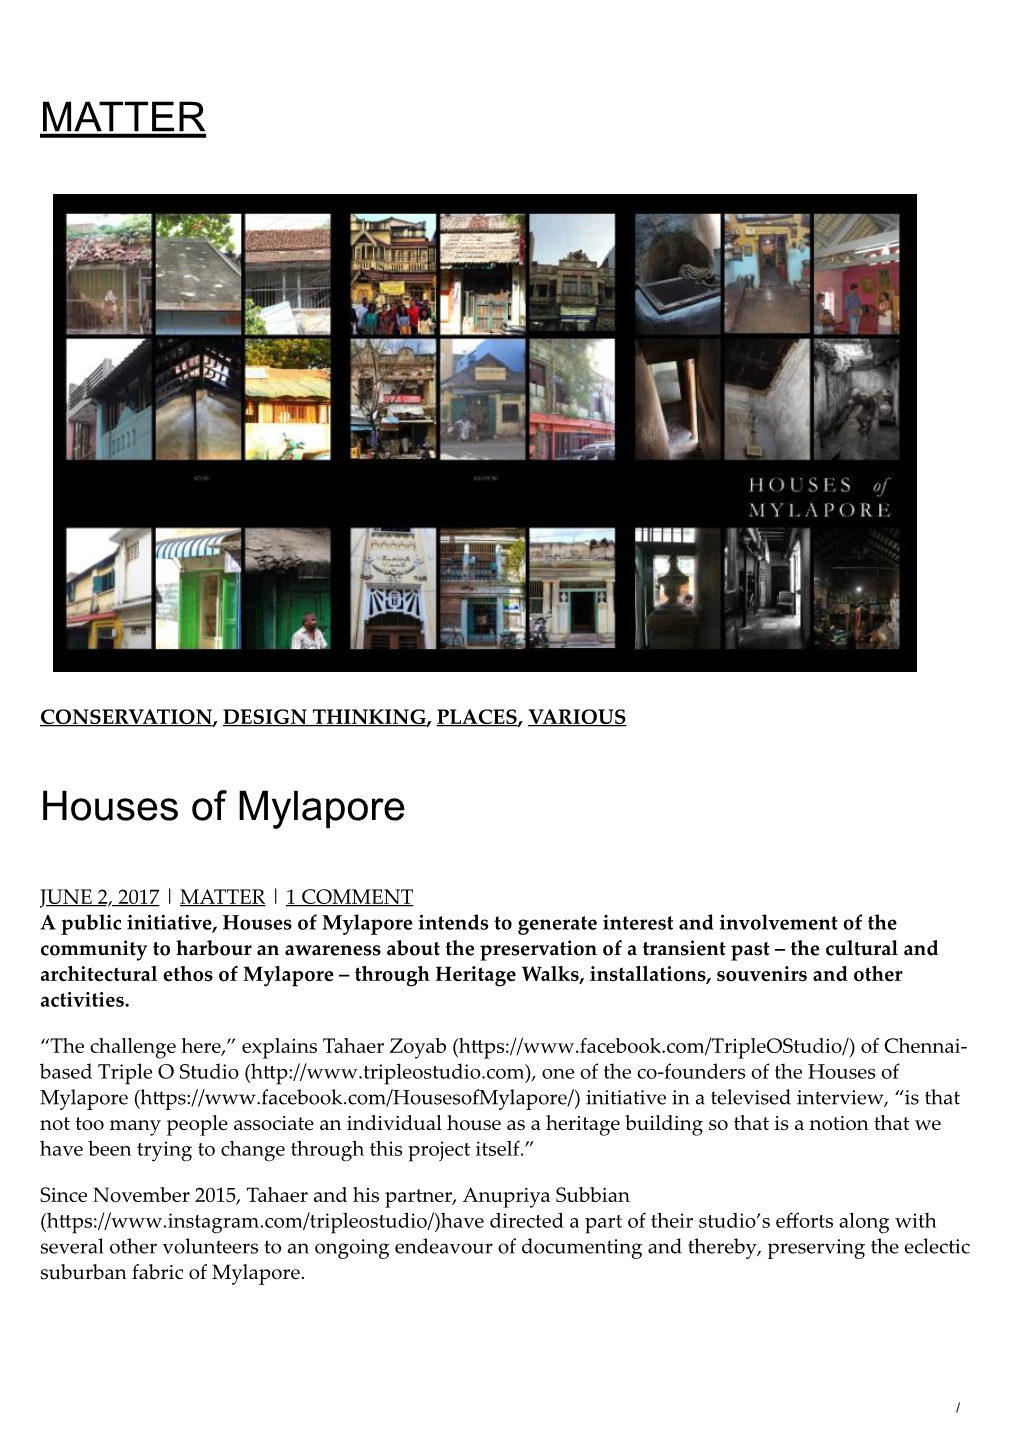 MATTER Houses of Mylapore